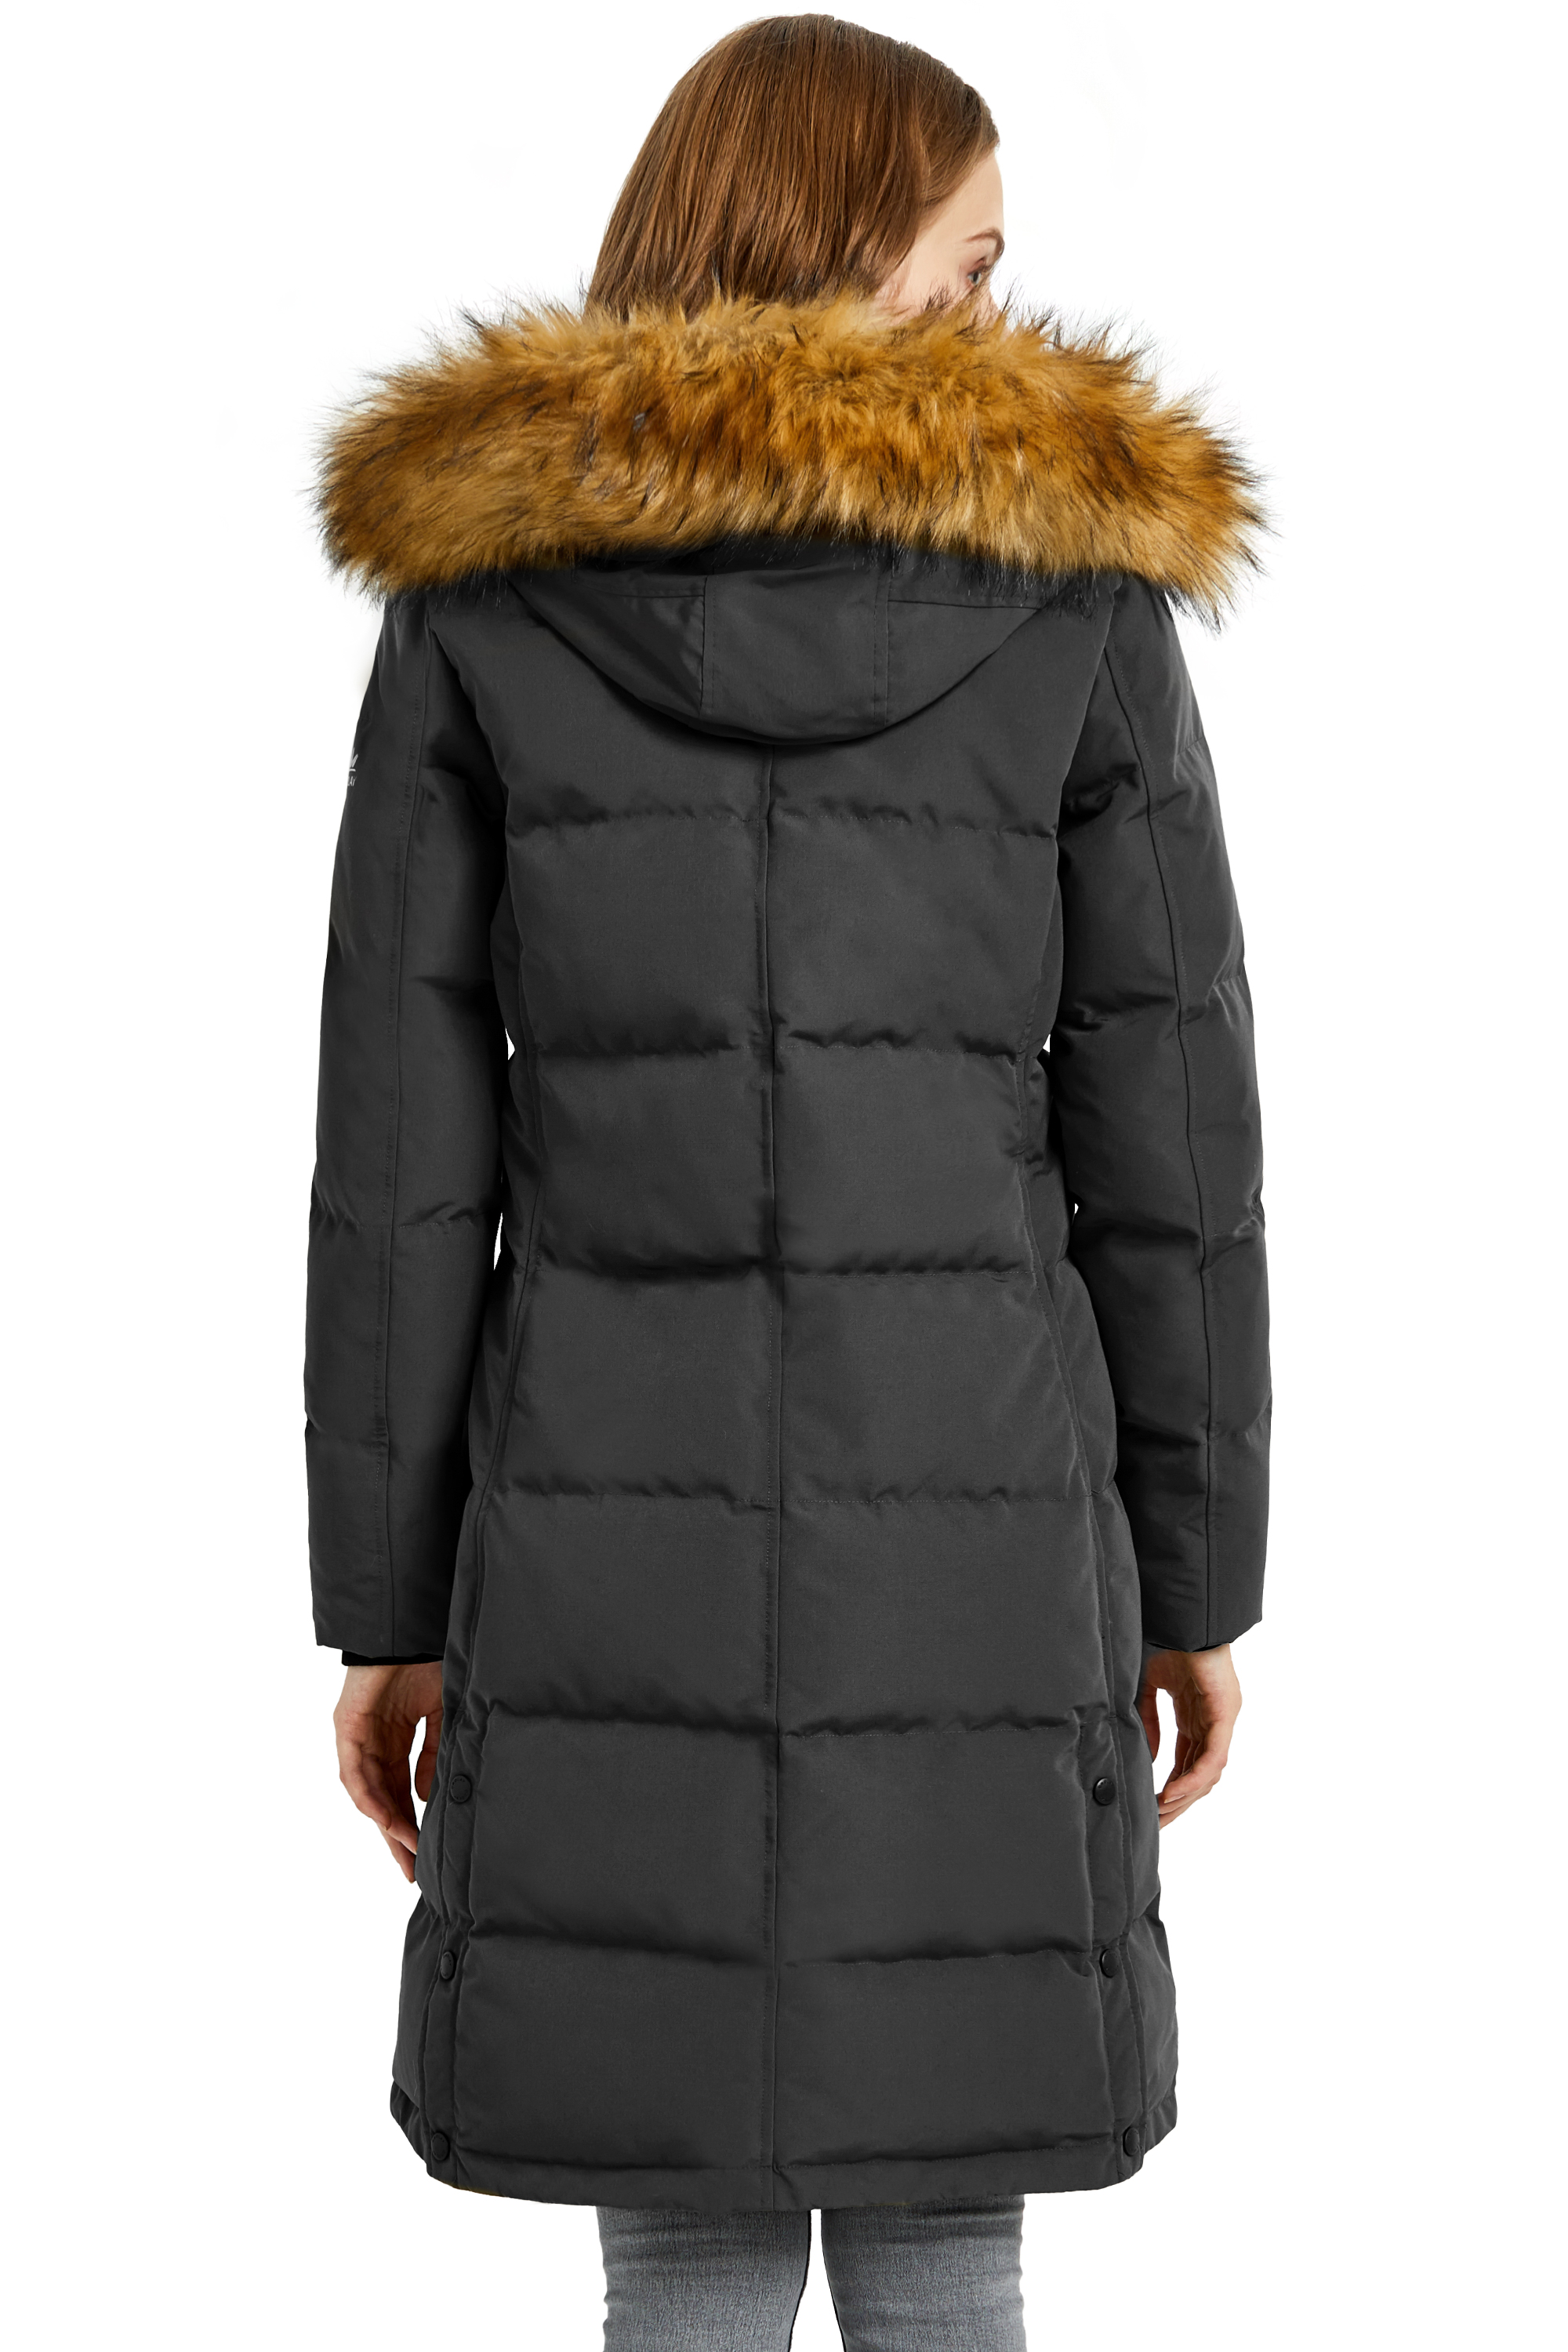 Orolay Women's Down Jacket Winter Long Coat Windproof Puffer Jacket with Fur Hood - image 2 of 5